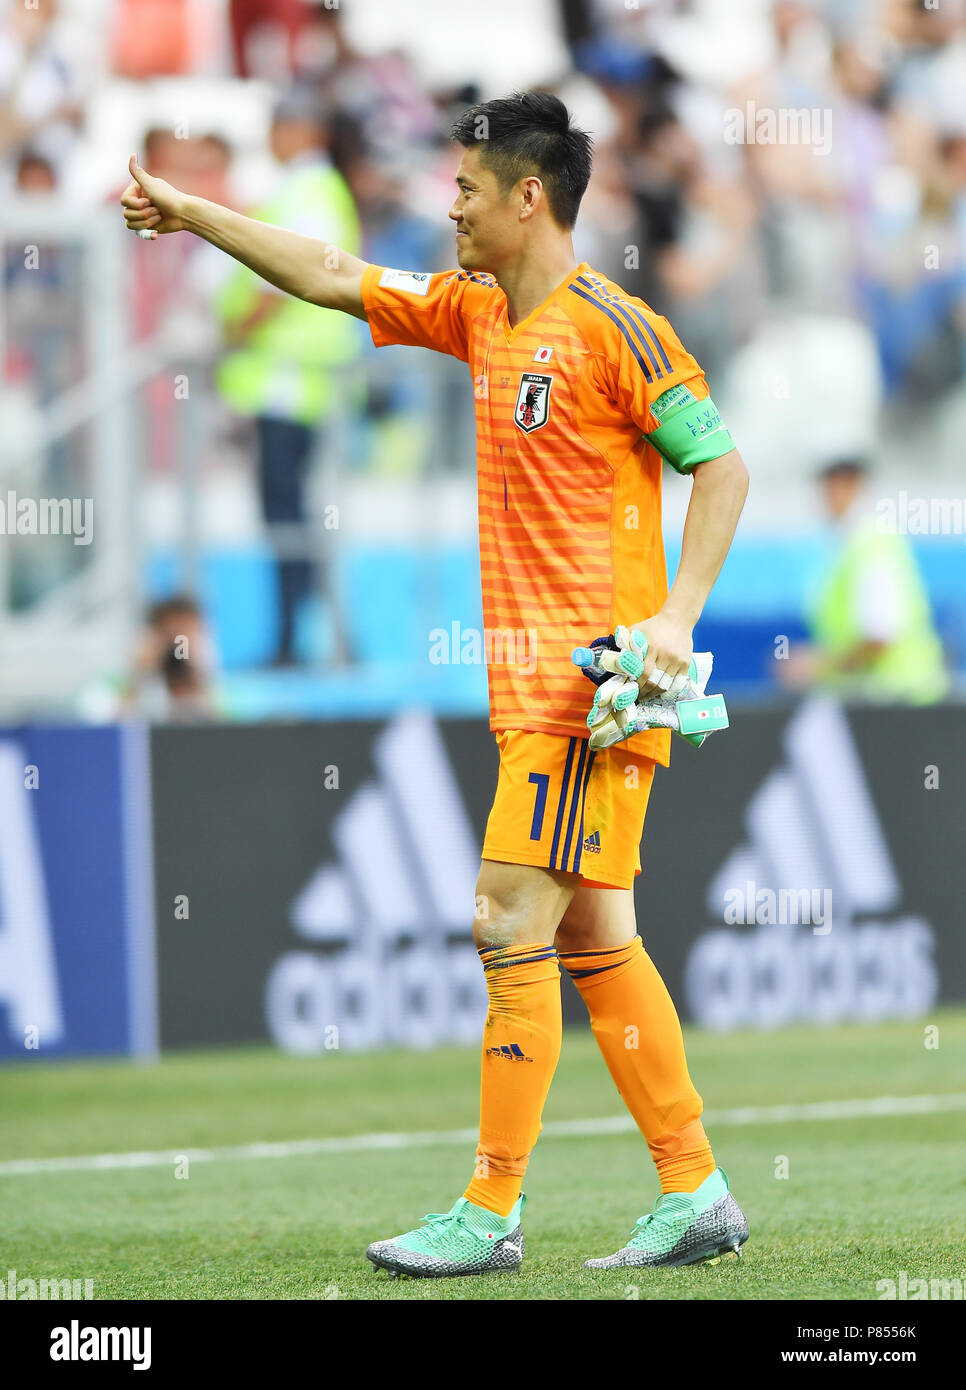 VOLGOGRAD, RUSSIA - JUNE 28: Eiji Kawashima of Japan celebrates at full time during during the 2018 FIFA World Cup Russia group H match between Japan and Poland at Volgograd Arena on June 28, 2018 in Volgograd, Russia. (Photo by Lukasz Laskowski/PressFocus/MB Media/) Stock Photo